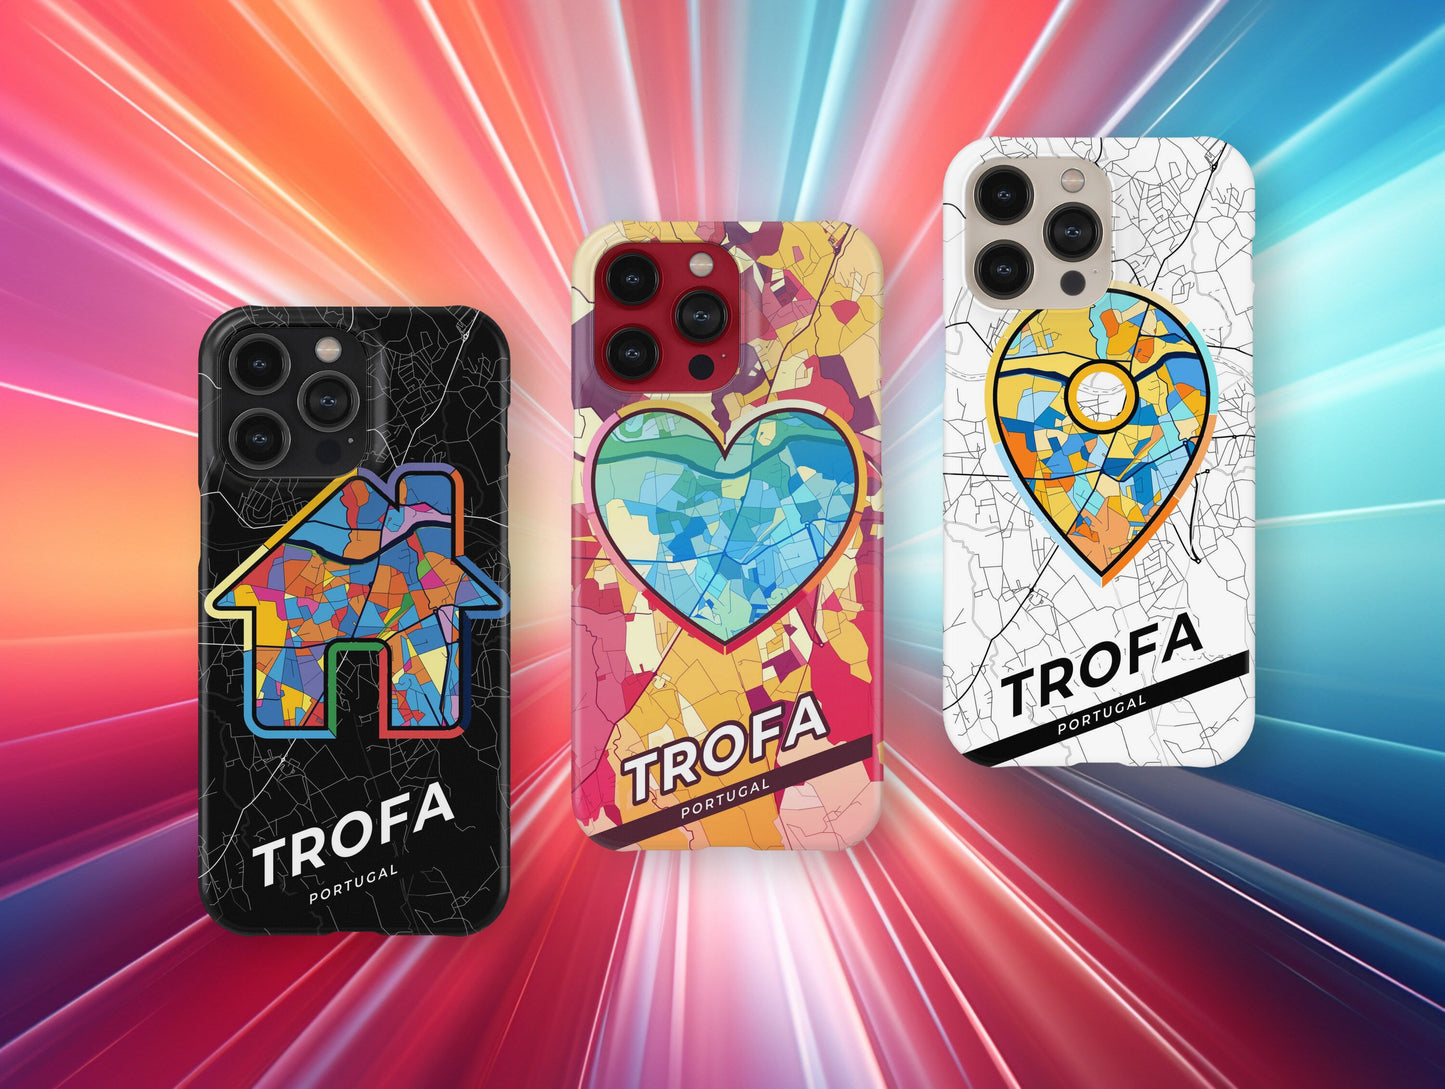 Trofa Portugal slim phone case with colorful icon